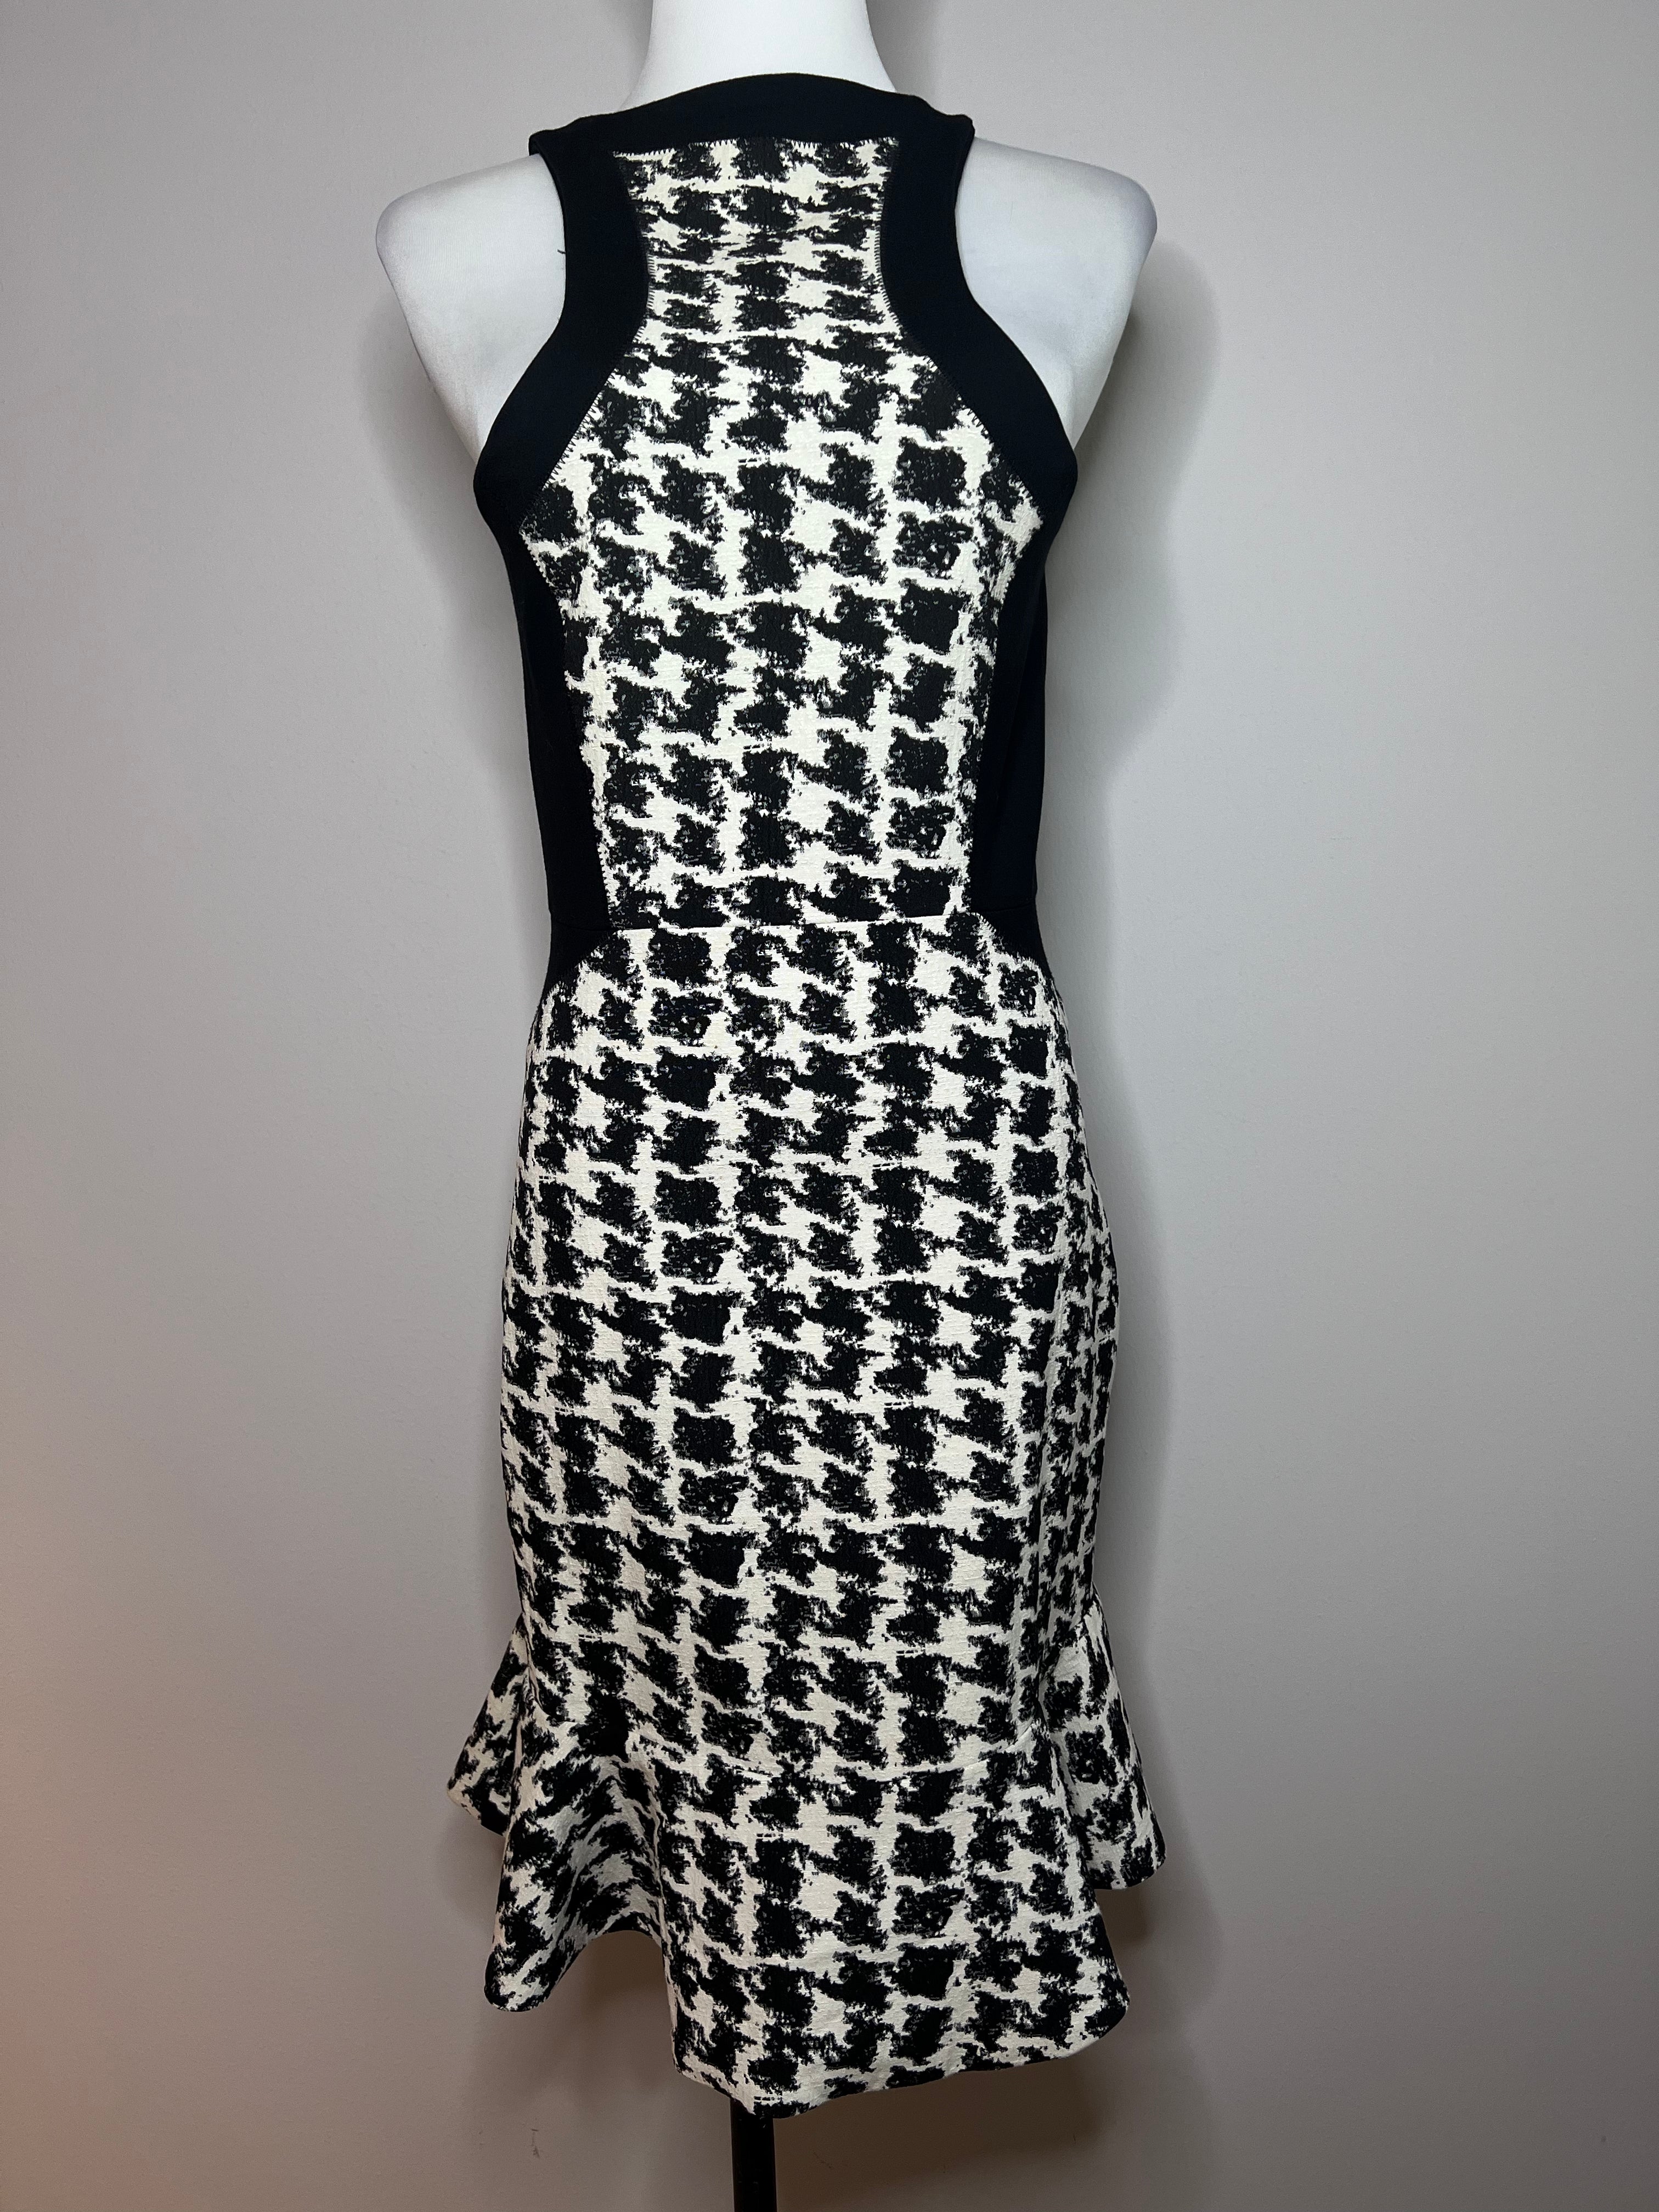 Aline halter top midi dress with a rough houndstooth pattern in the center and zipper going down the middle. - PARKER